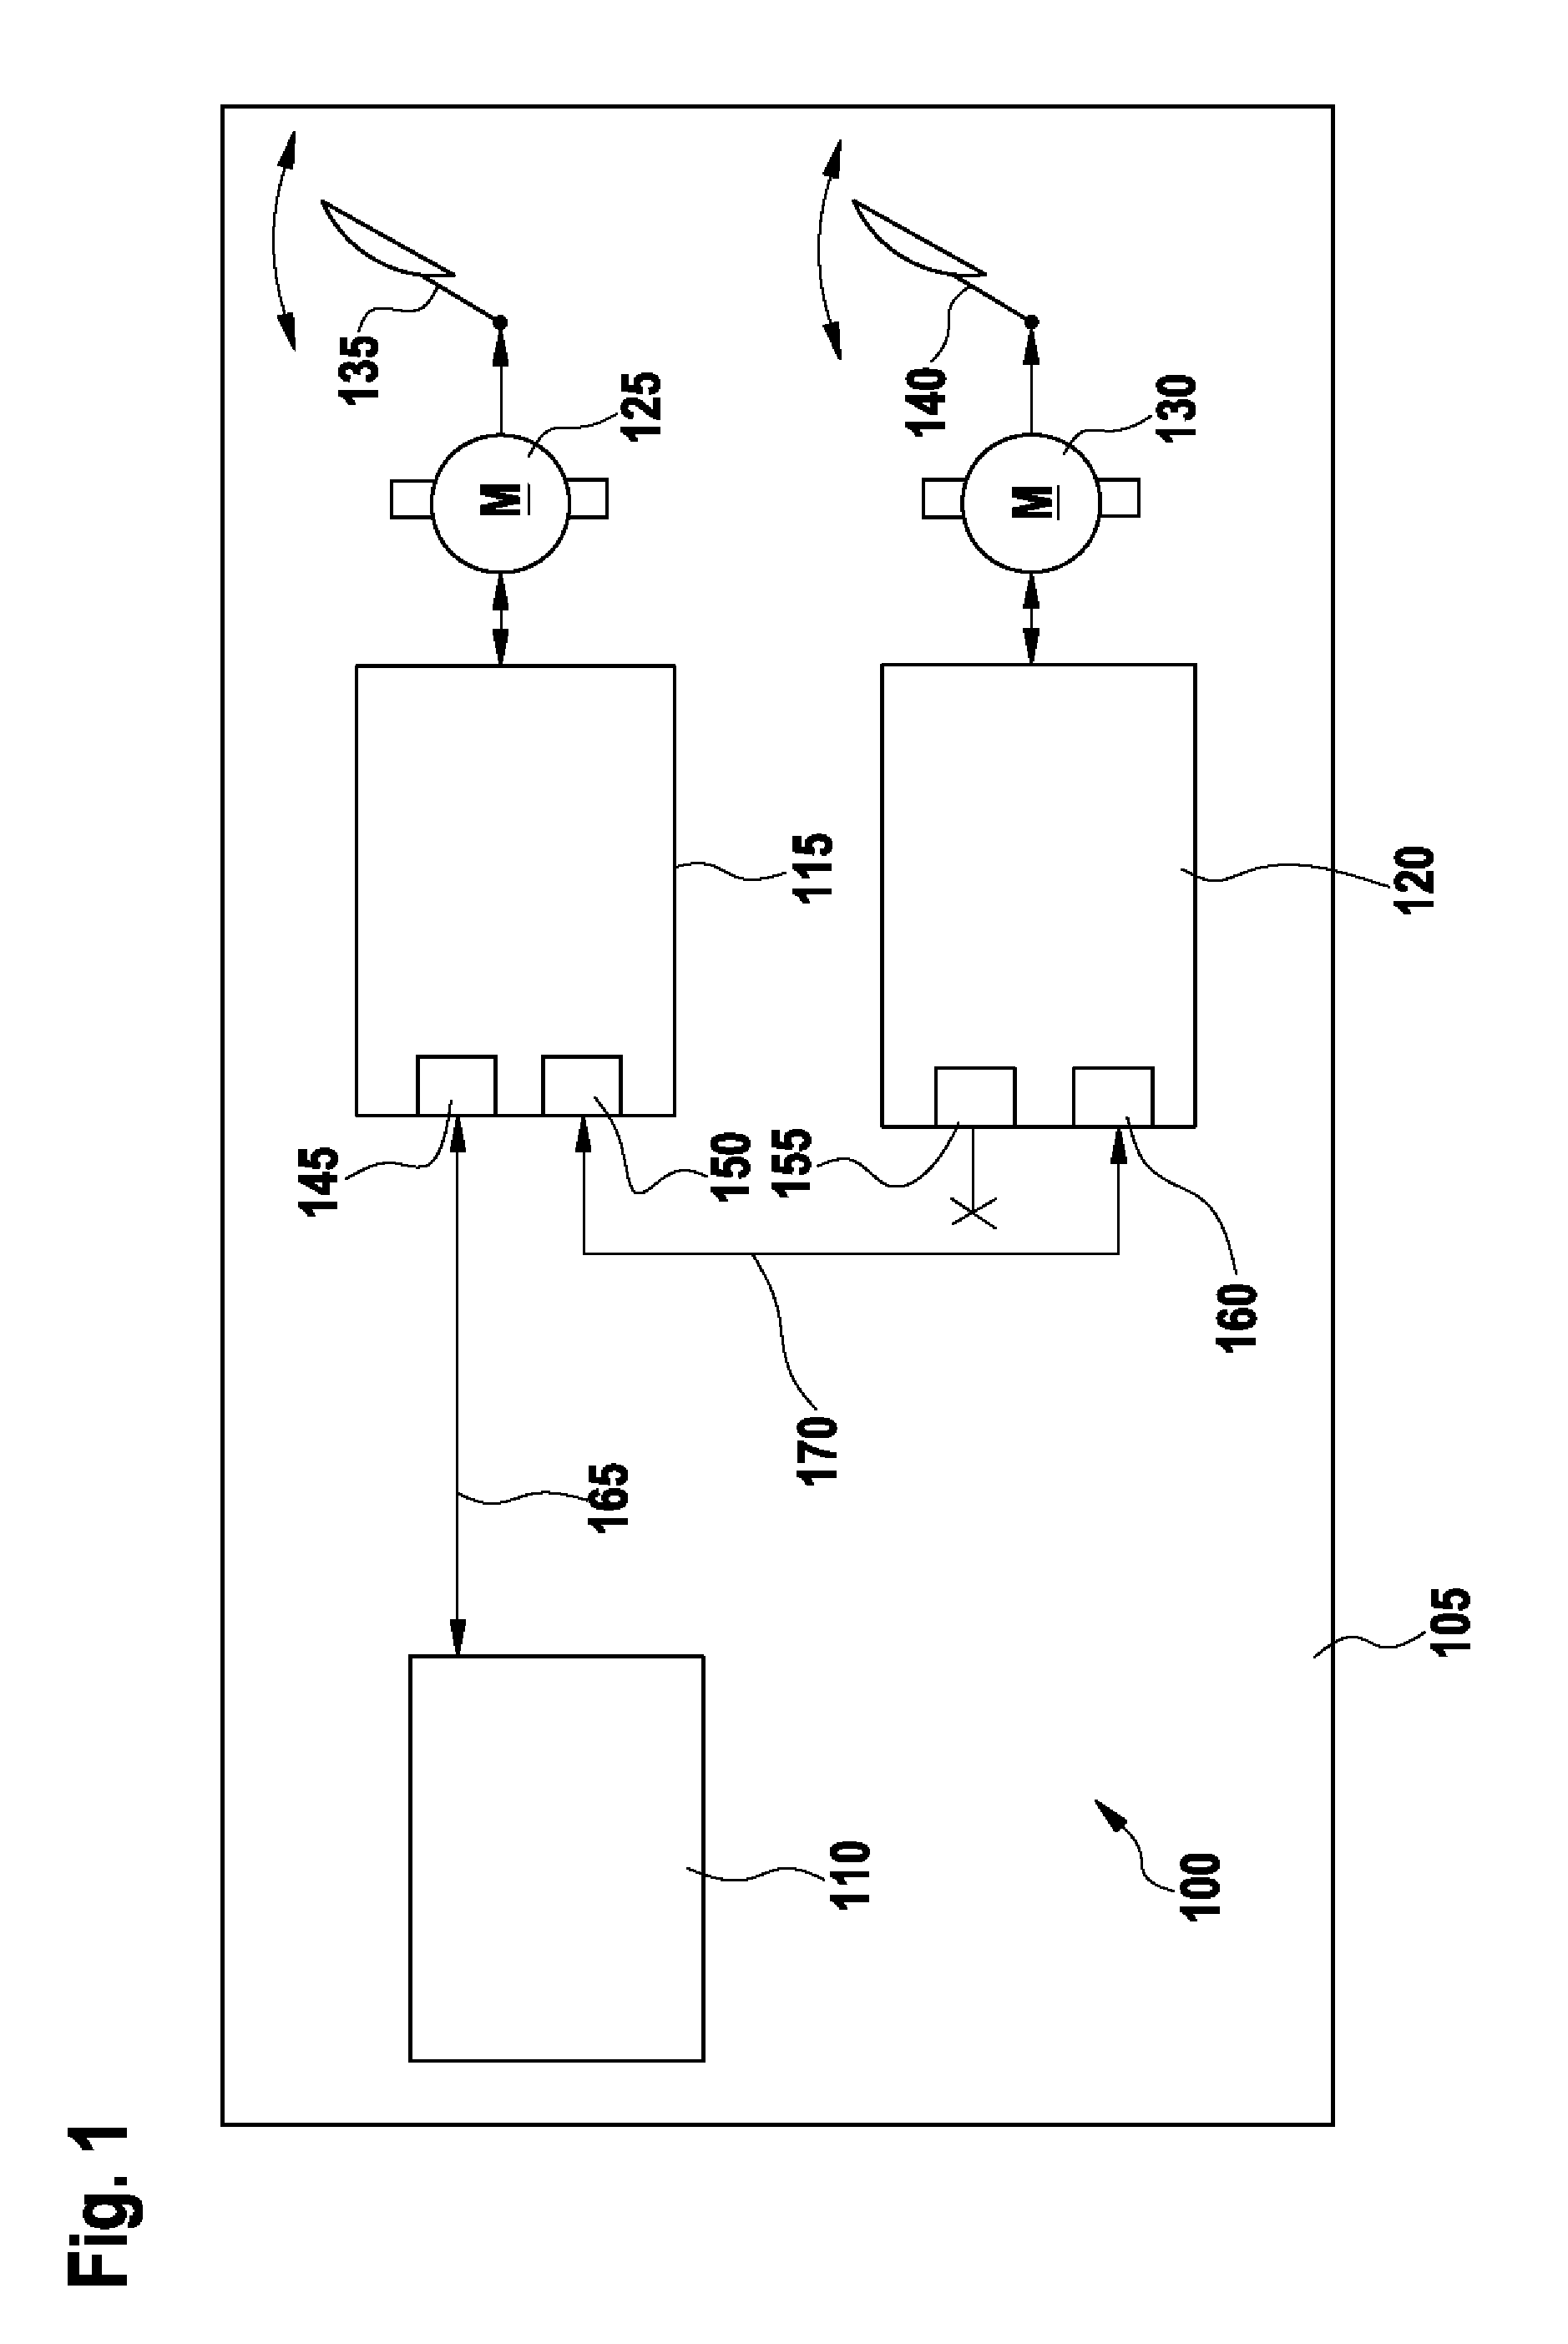 Windscreen wiper drive control system and method